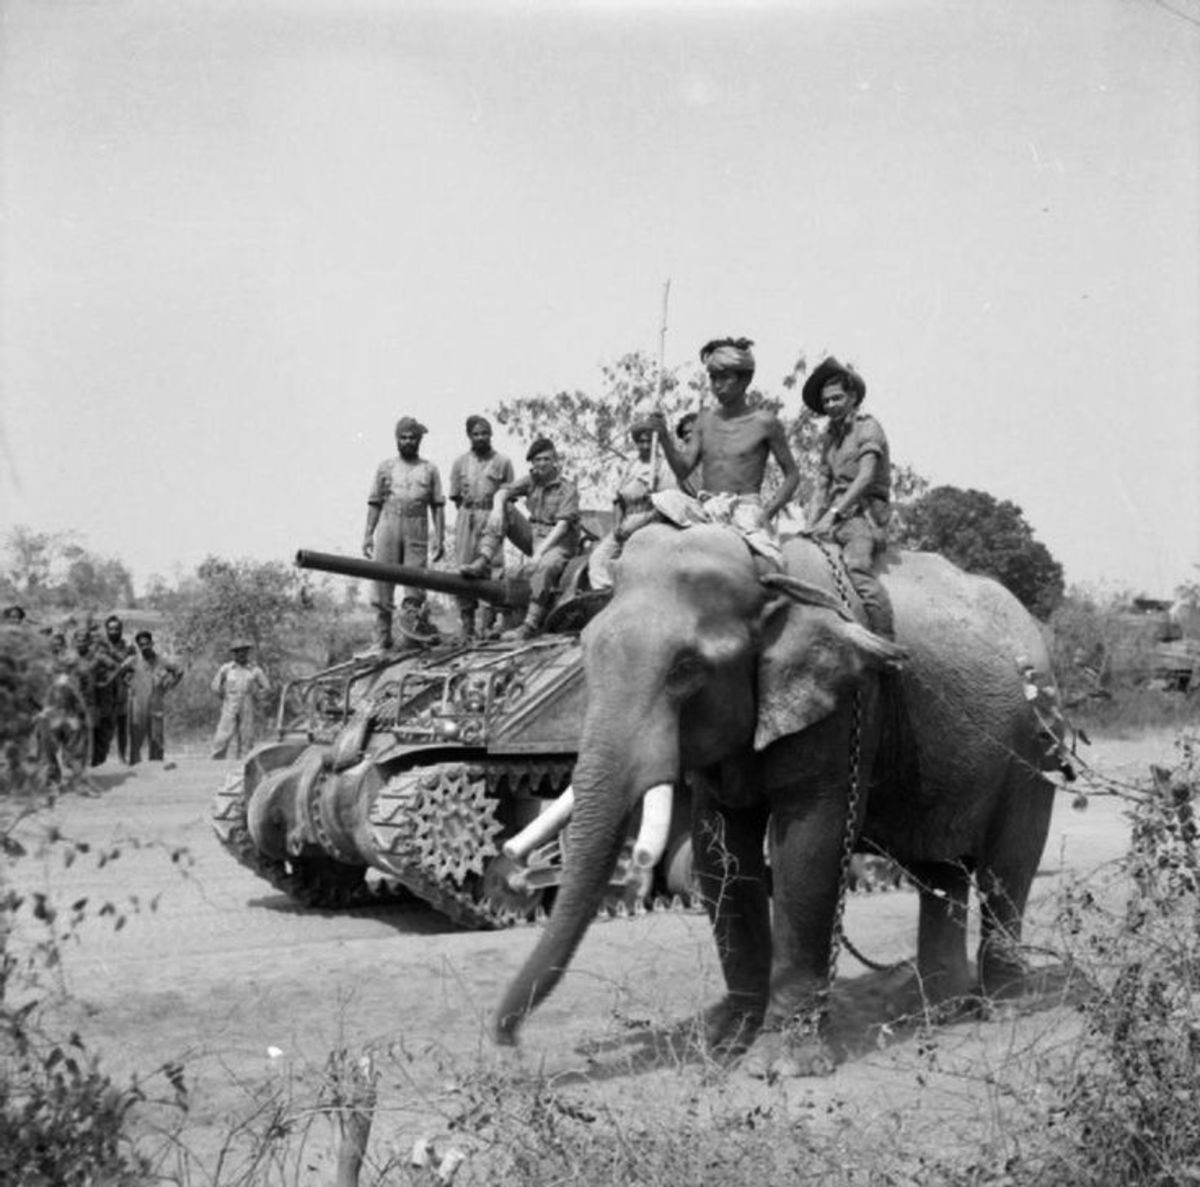 lieutenant-colonel-james-howard-williams-and-his-elephant-corps-in-burma-ww-ii